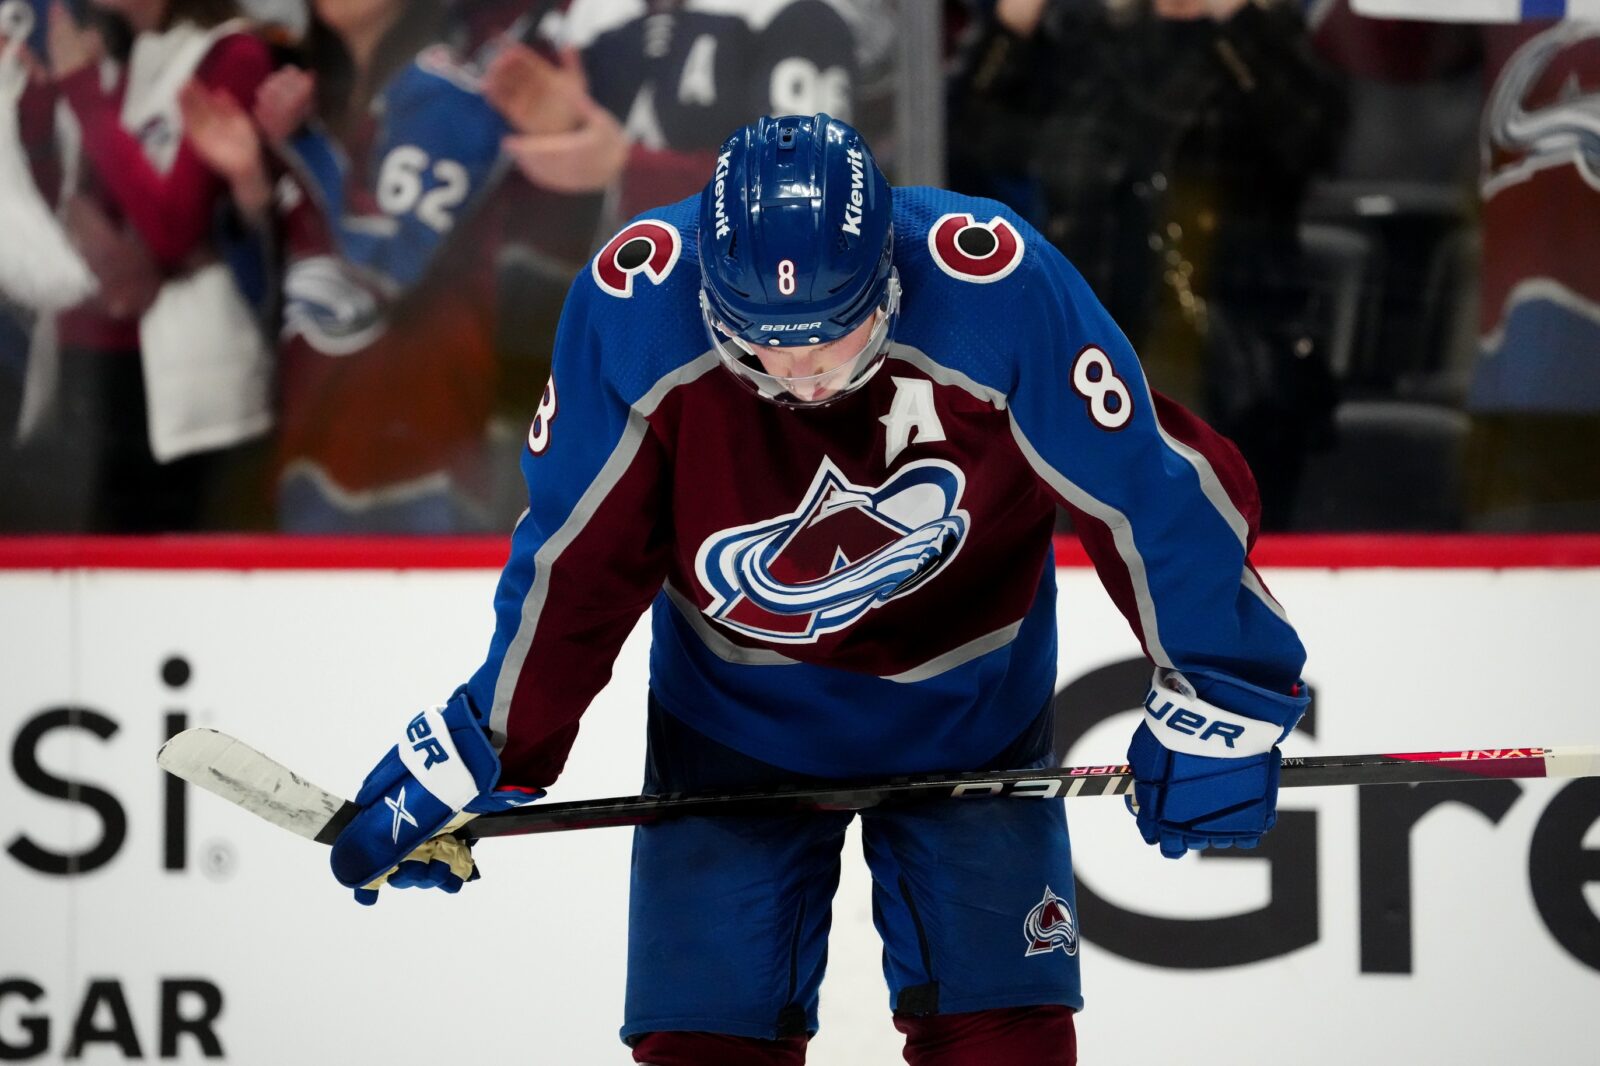 Cale Makar to wear number 8 for the Colorado Avalanche - Mile High Hockey